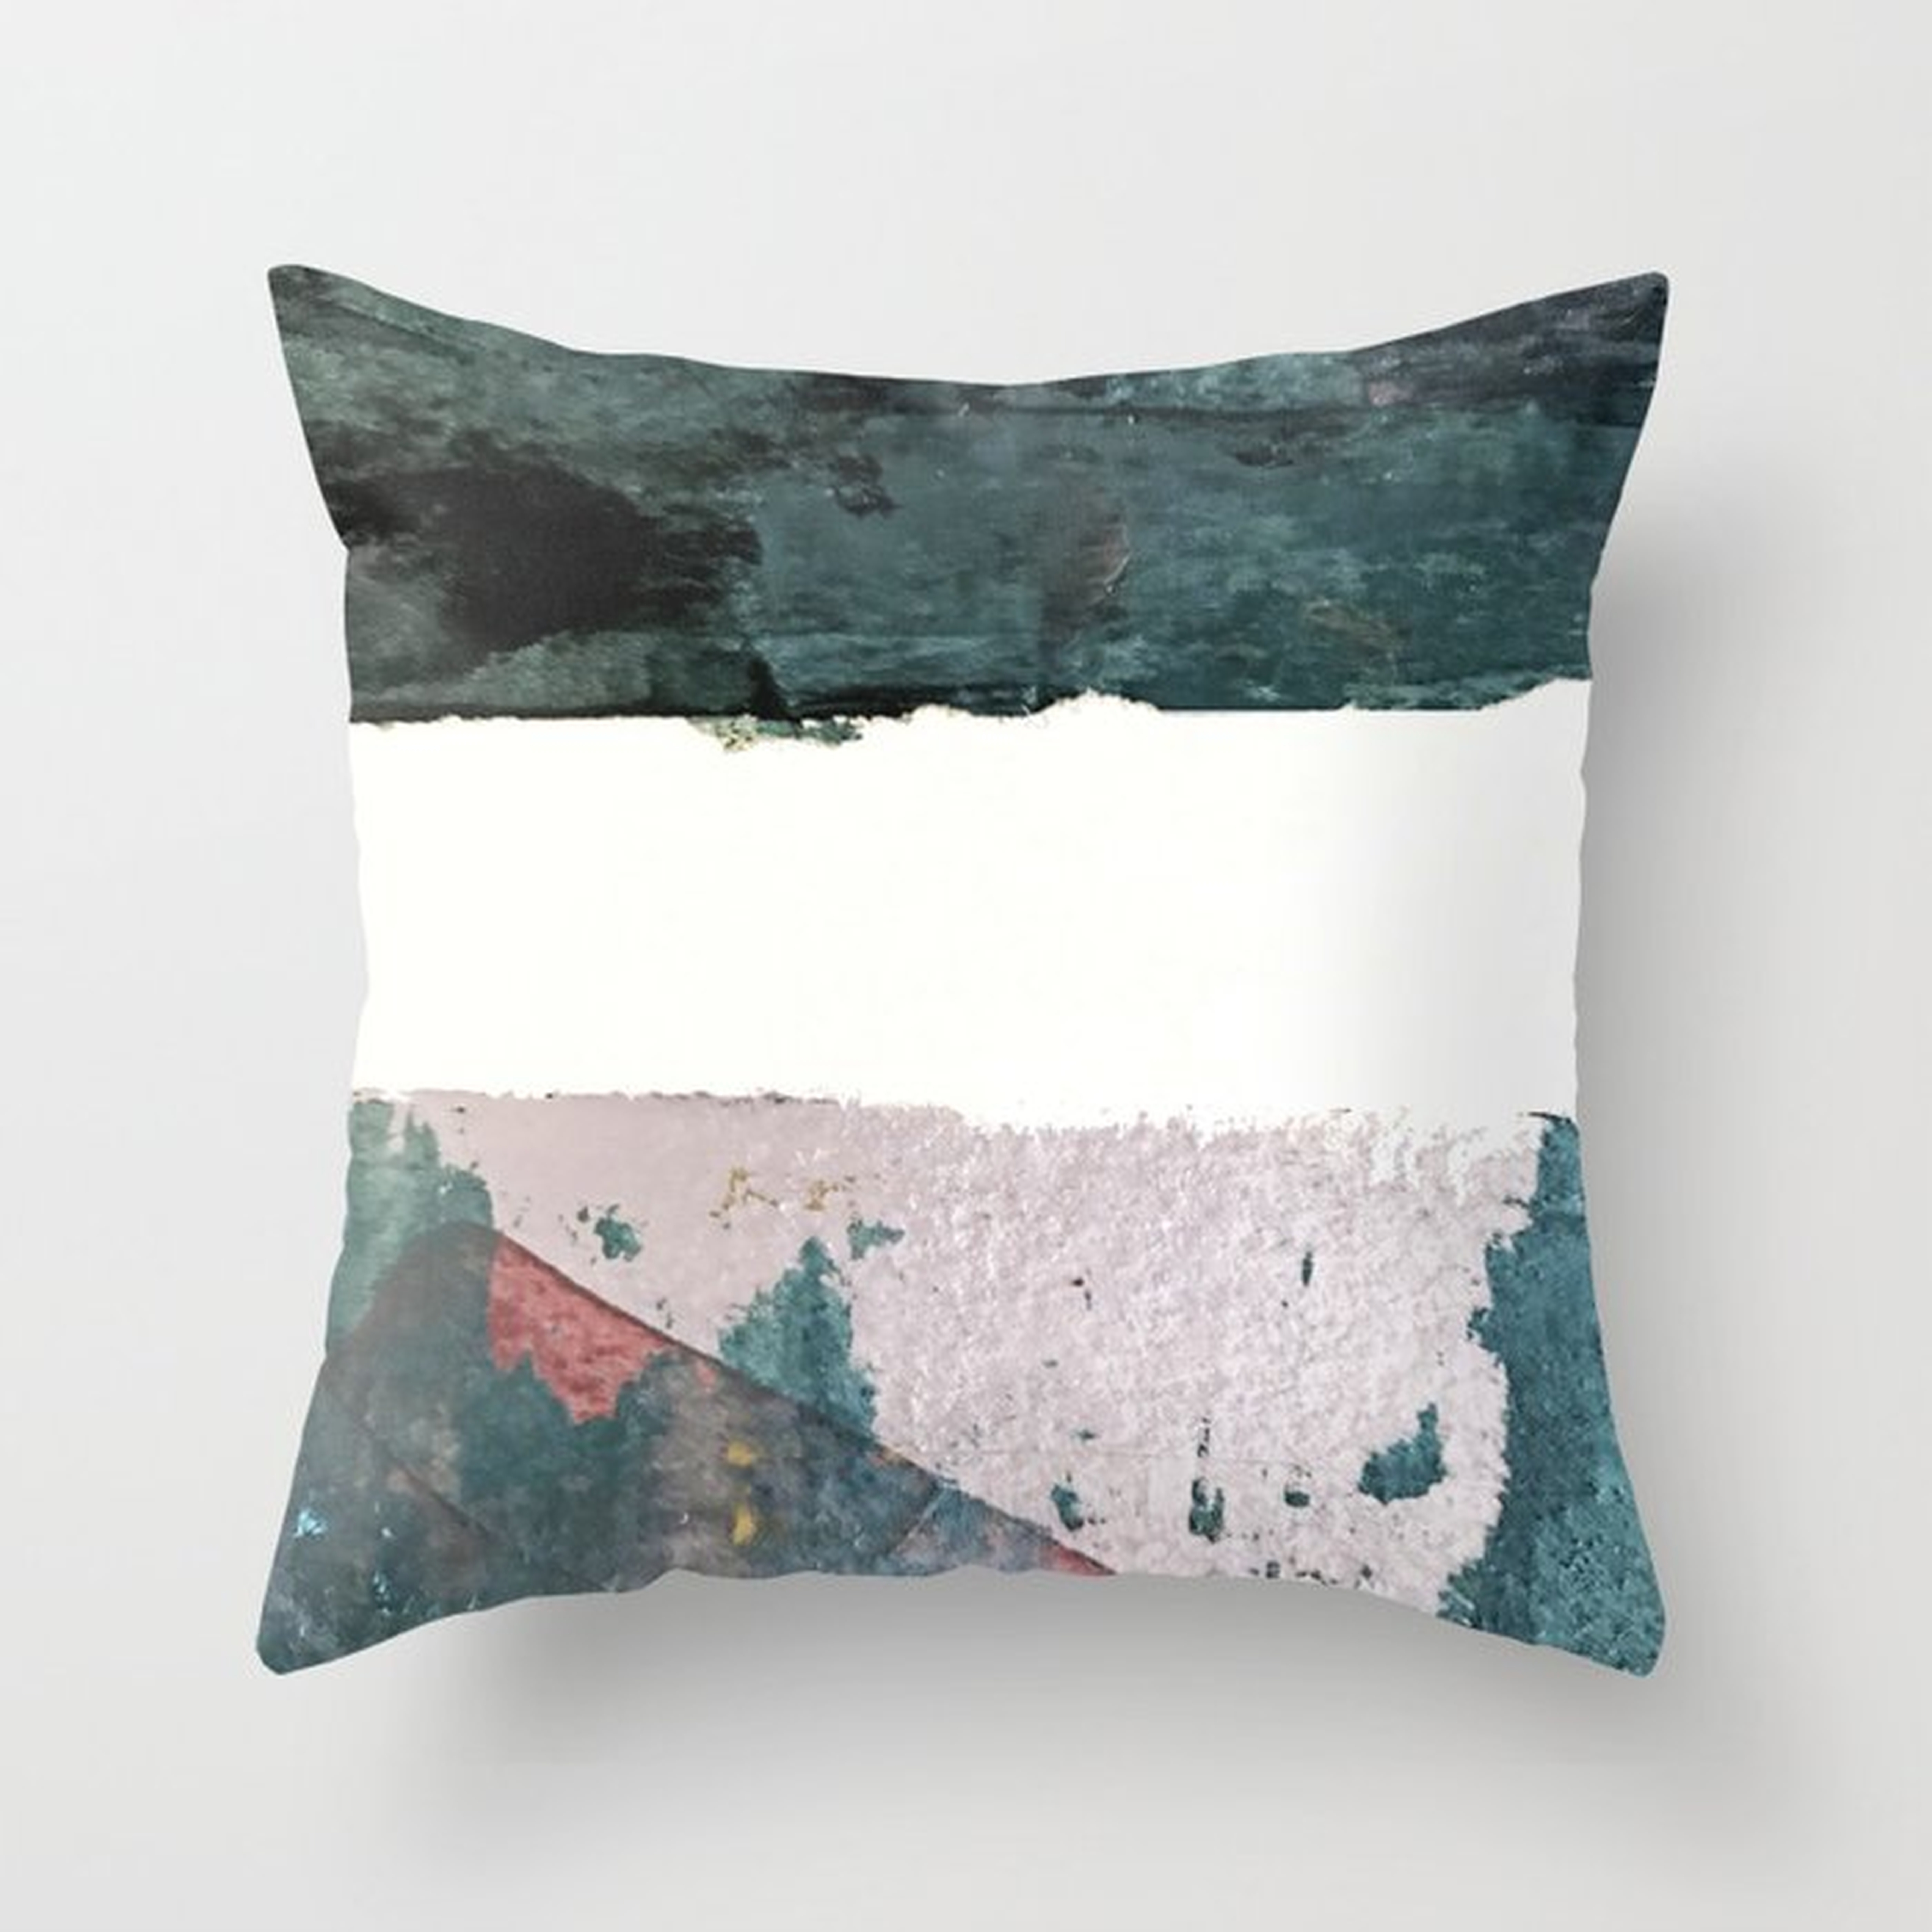 Between Us: A Minimal, Abstract Mixed-media Piece In Blues, Muted Purple, And Pinks Couch Throw Pillow by Alyssa Hamilton Art - Cover (18" x 18") with pillow insert - Outdoor Pillow - Society6